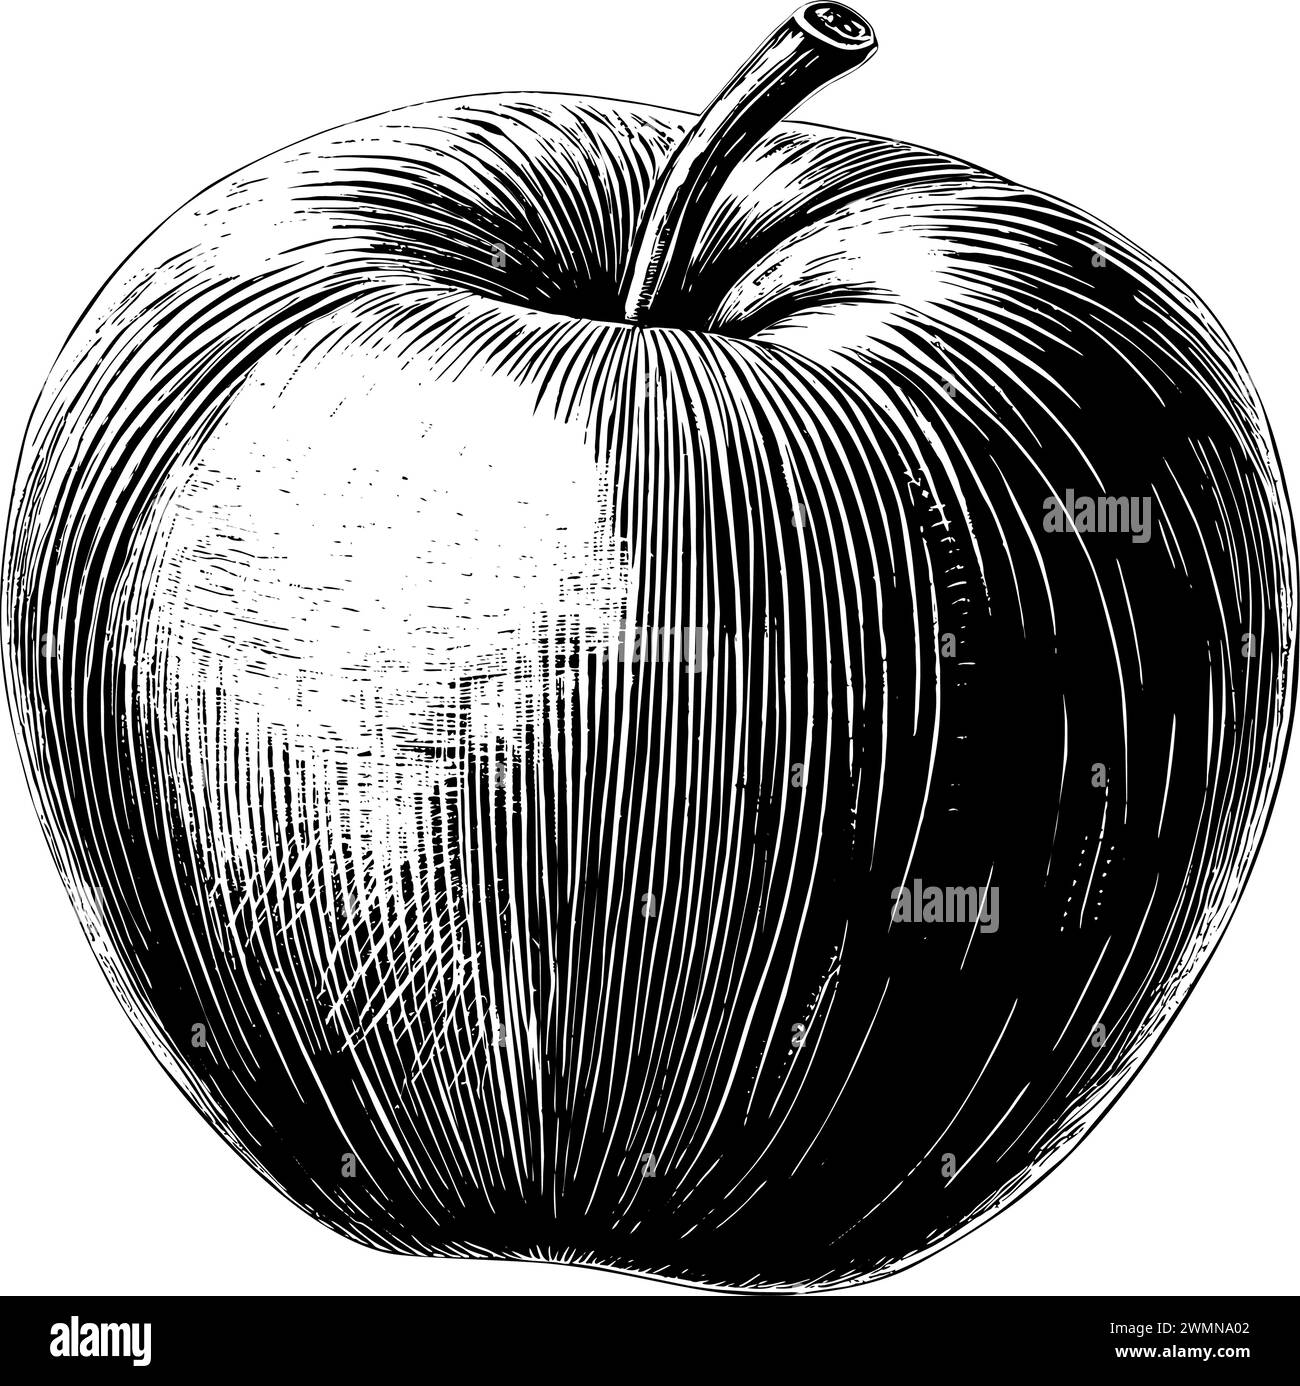 Apple engraving hand drawn isolated fruit Stock Vector